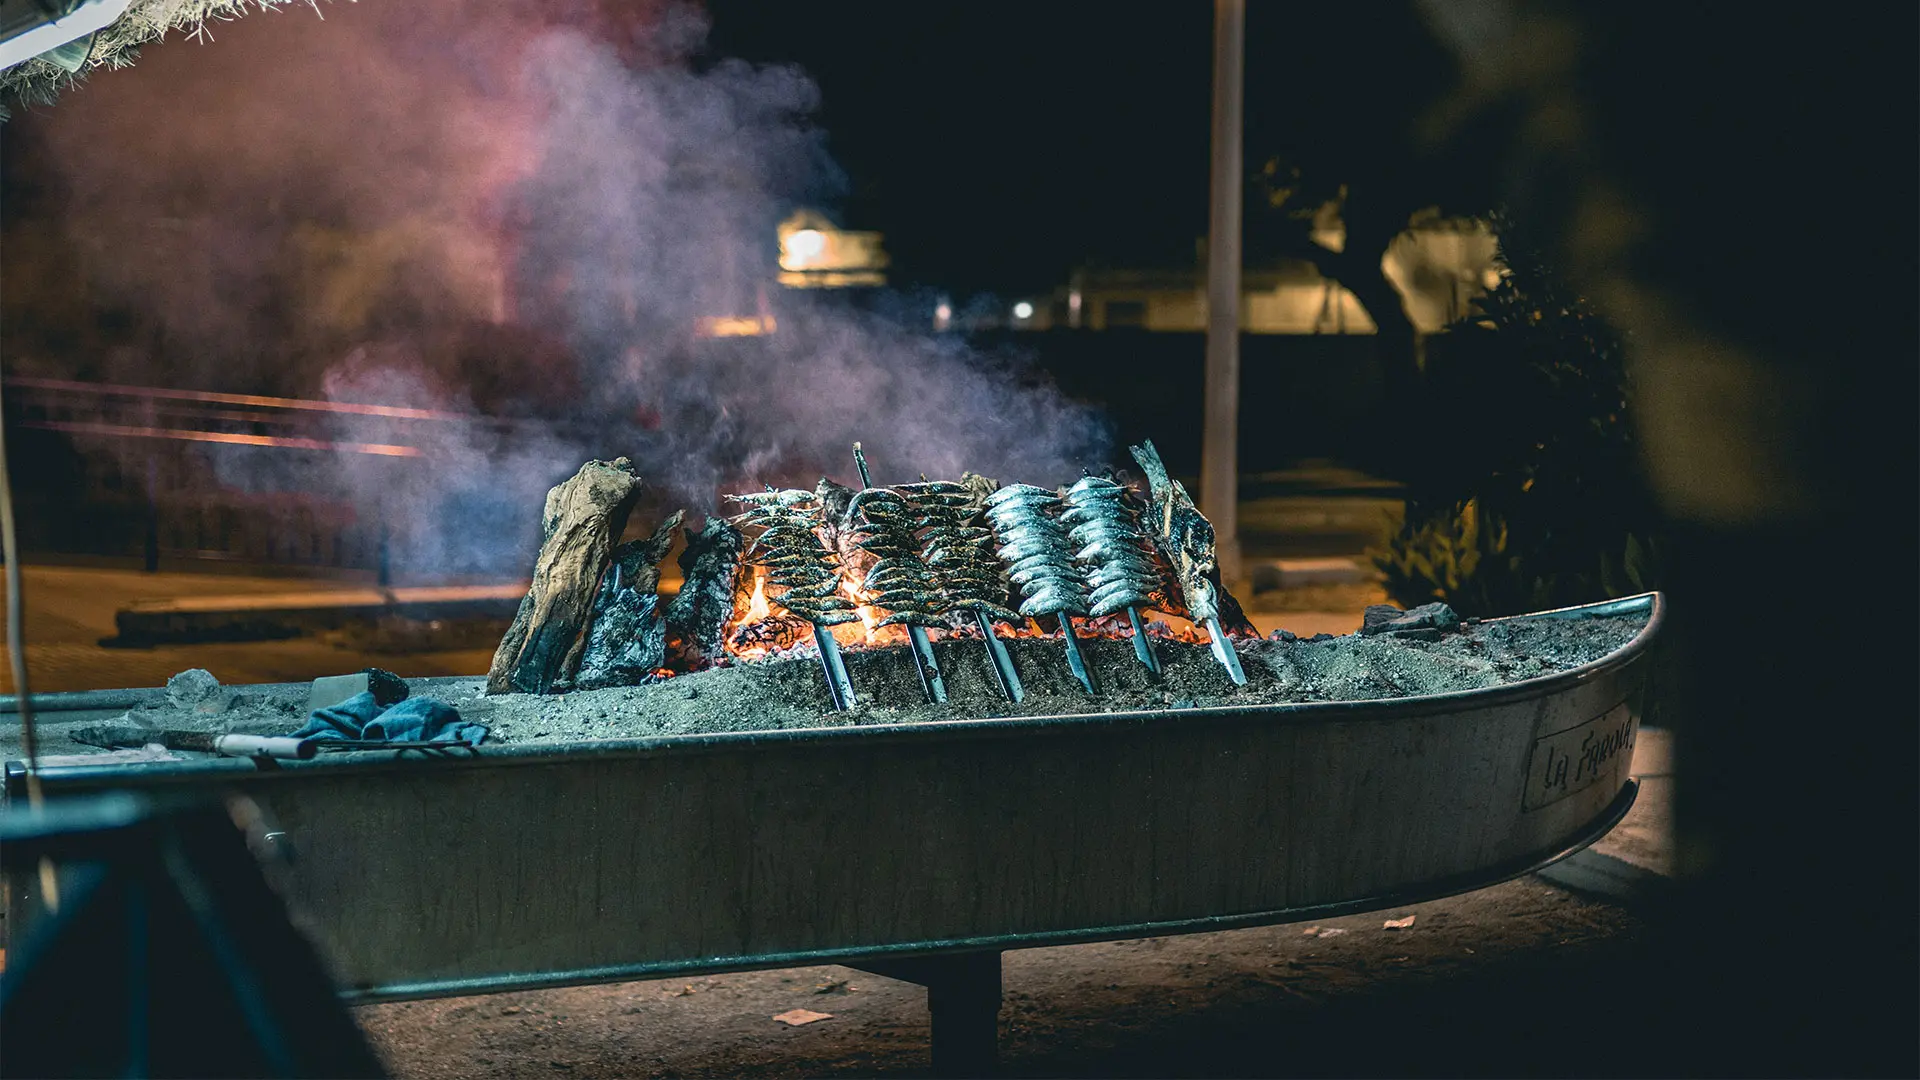 espeto in boat: Sardines cooked over an open fire in a sand-filled boat. This is called espeto in Malaga.